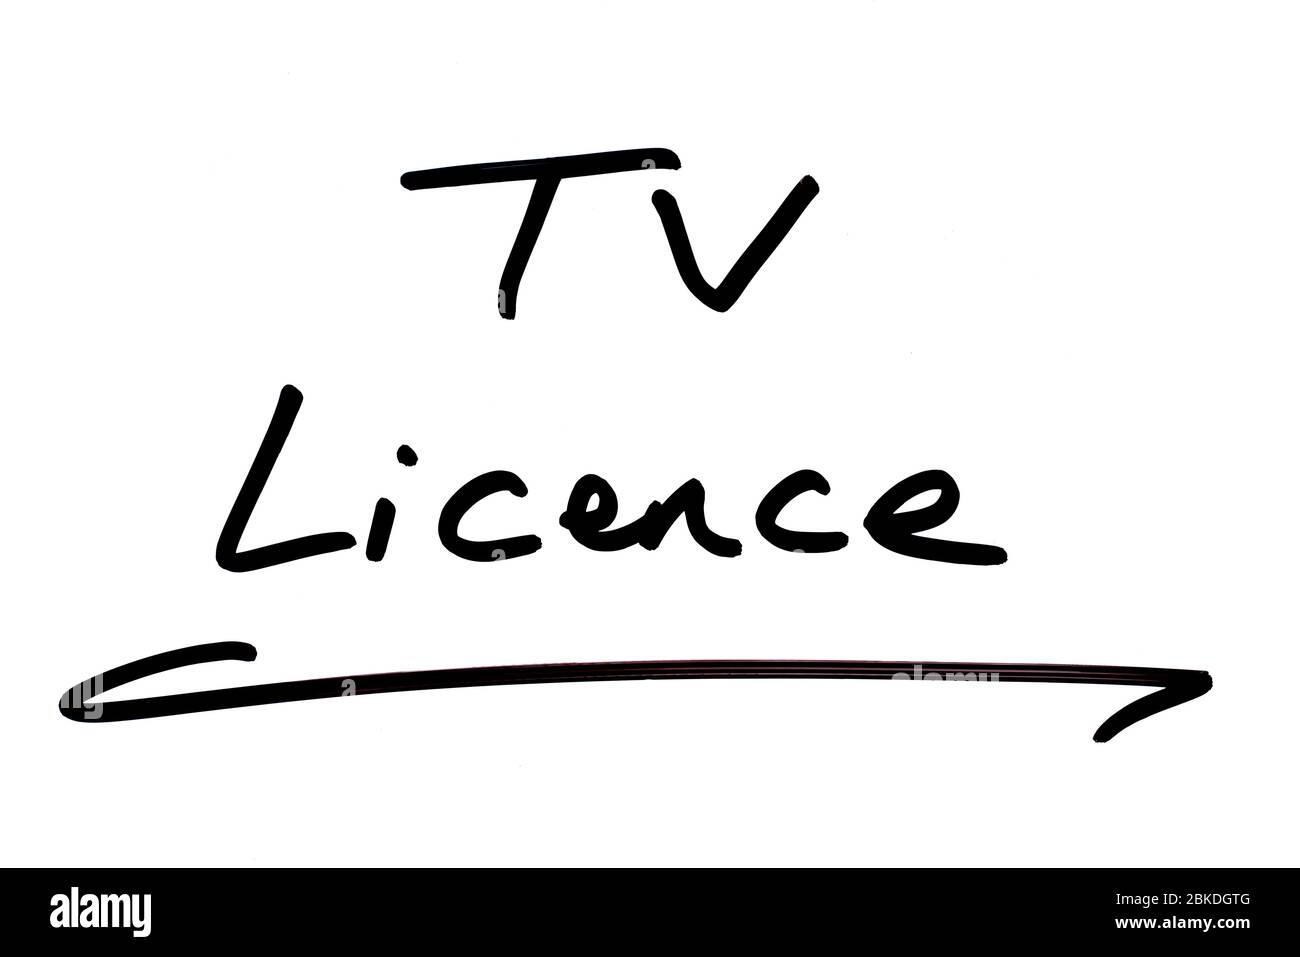 TV Licence handwritten on a white background. Stock Photo